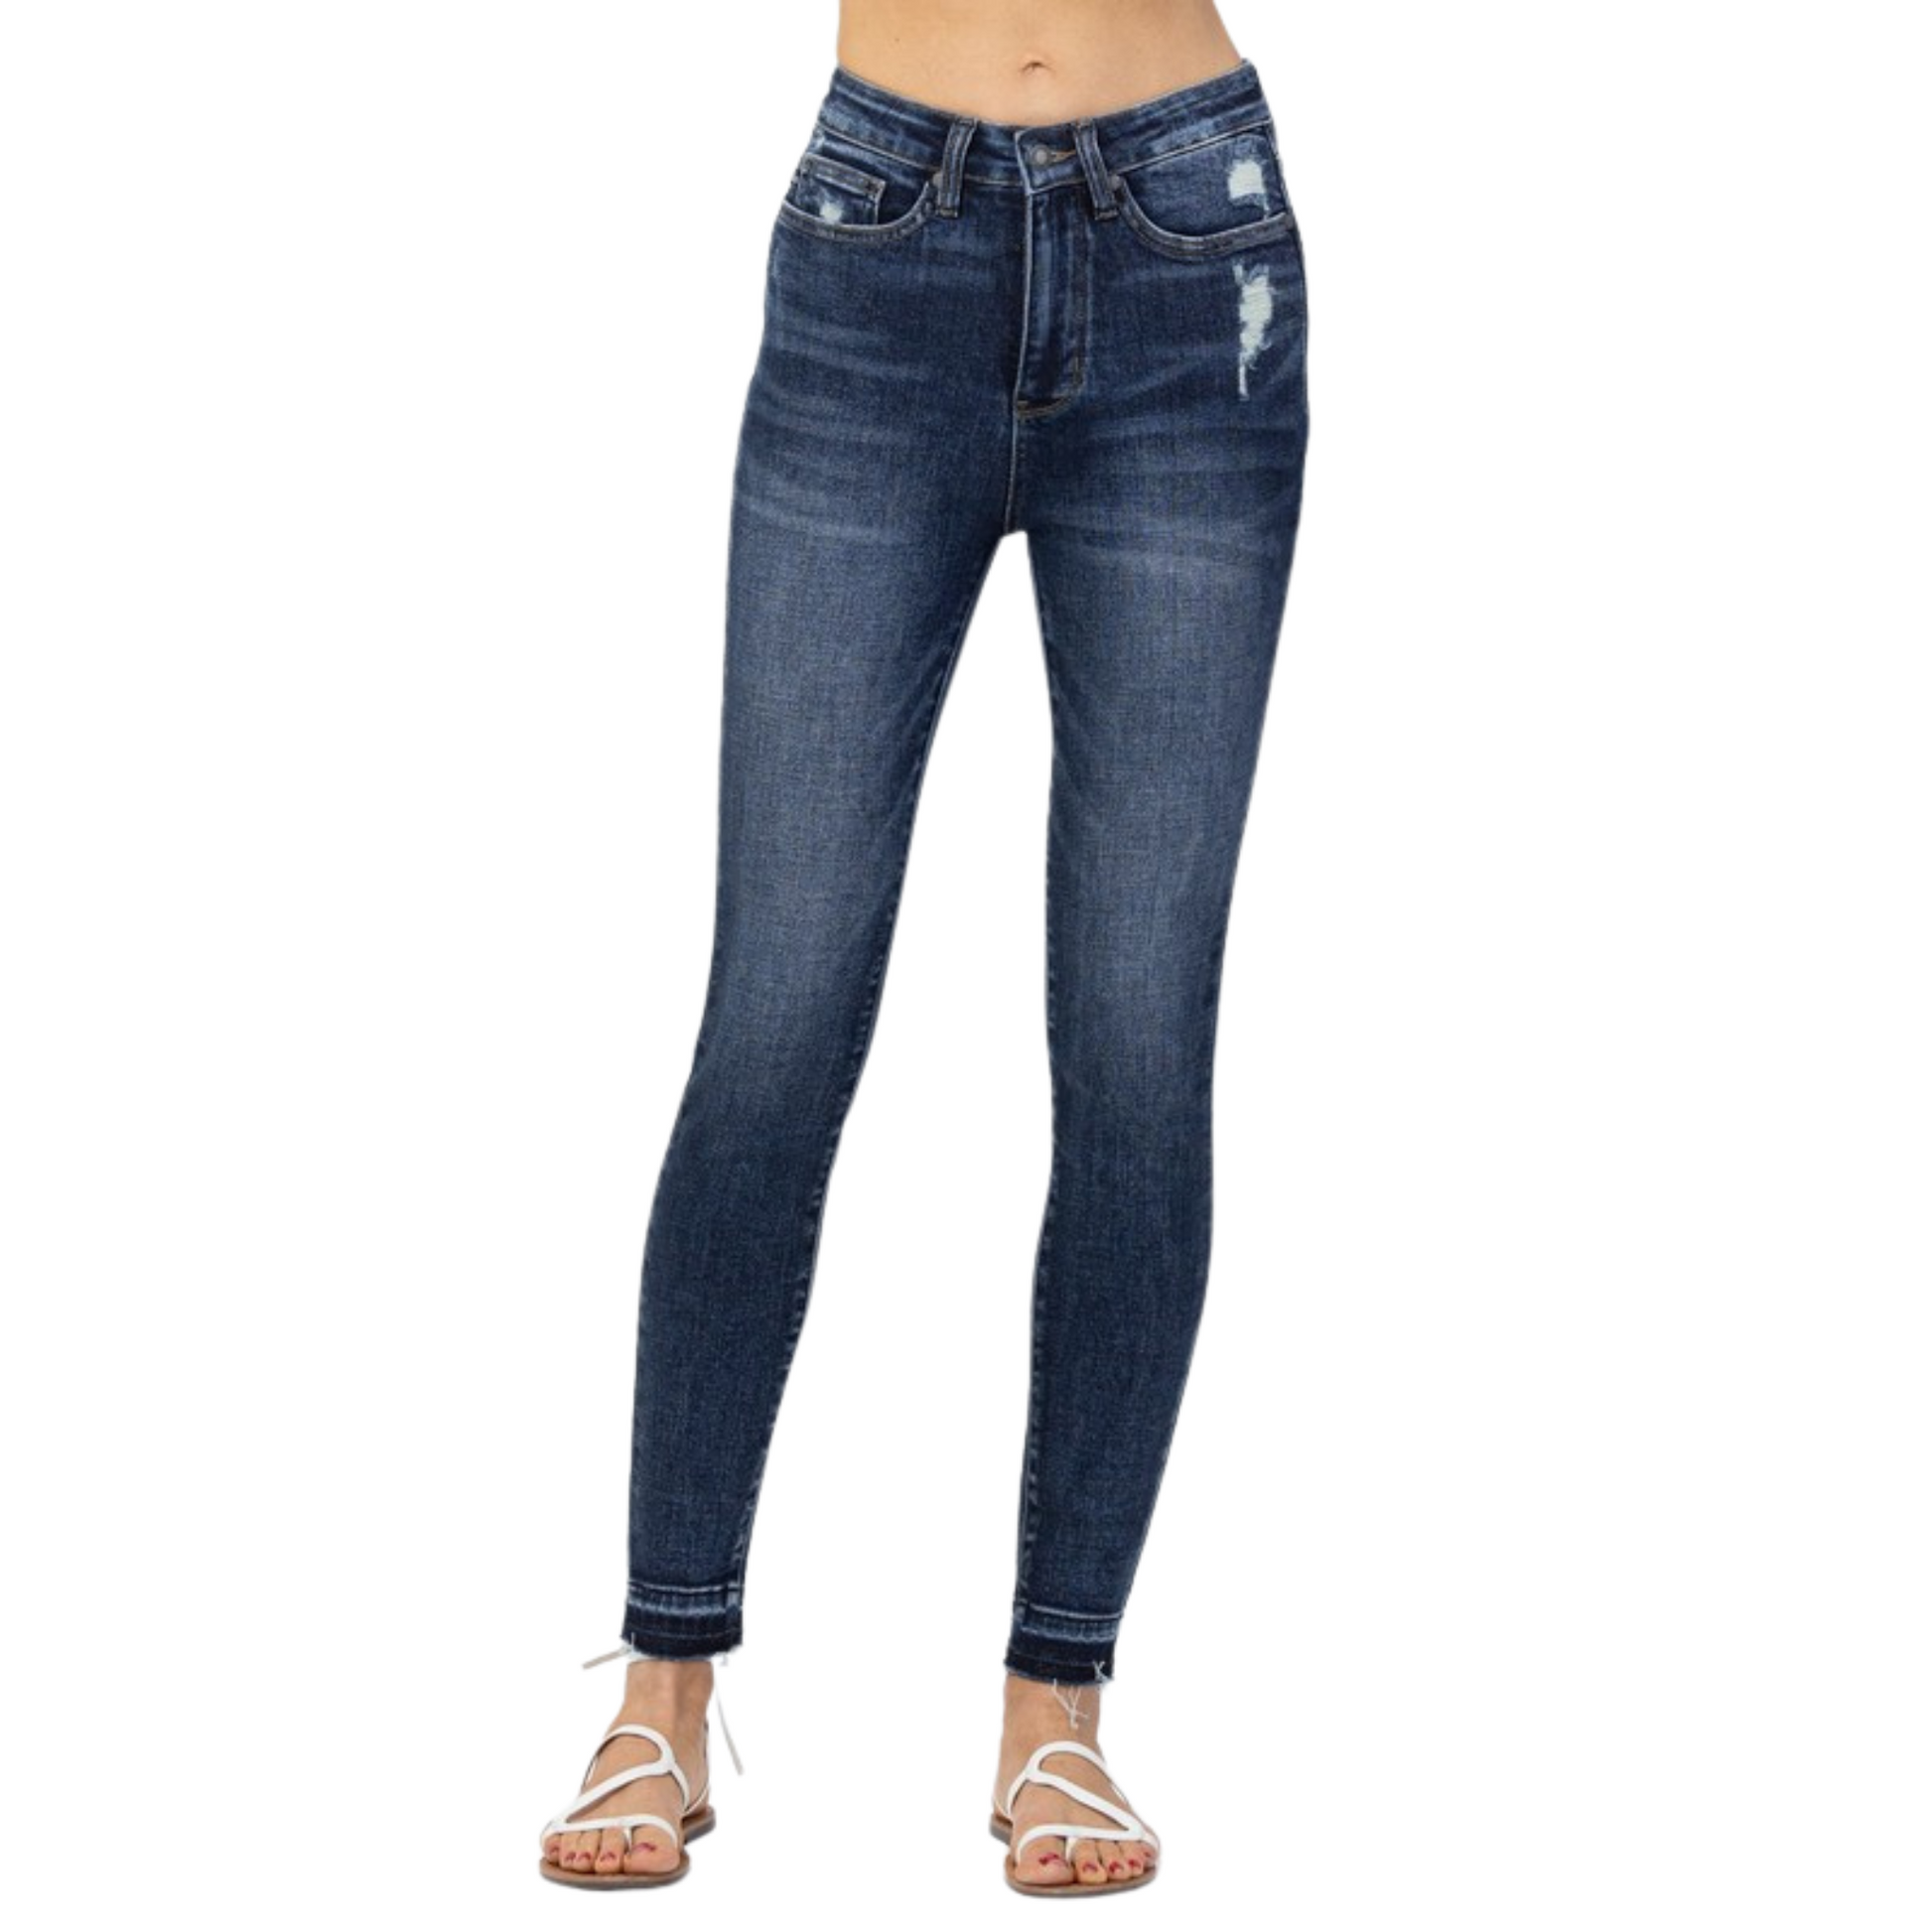 These High Waist Tummy Control Skinny Jeans are a stylish and comfortable way to flatter your curves. Their dark wash is a timeless classic that can easily be dressed up or down, and the high waist and skinny fit provide a flattering silhouette to any body type.